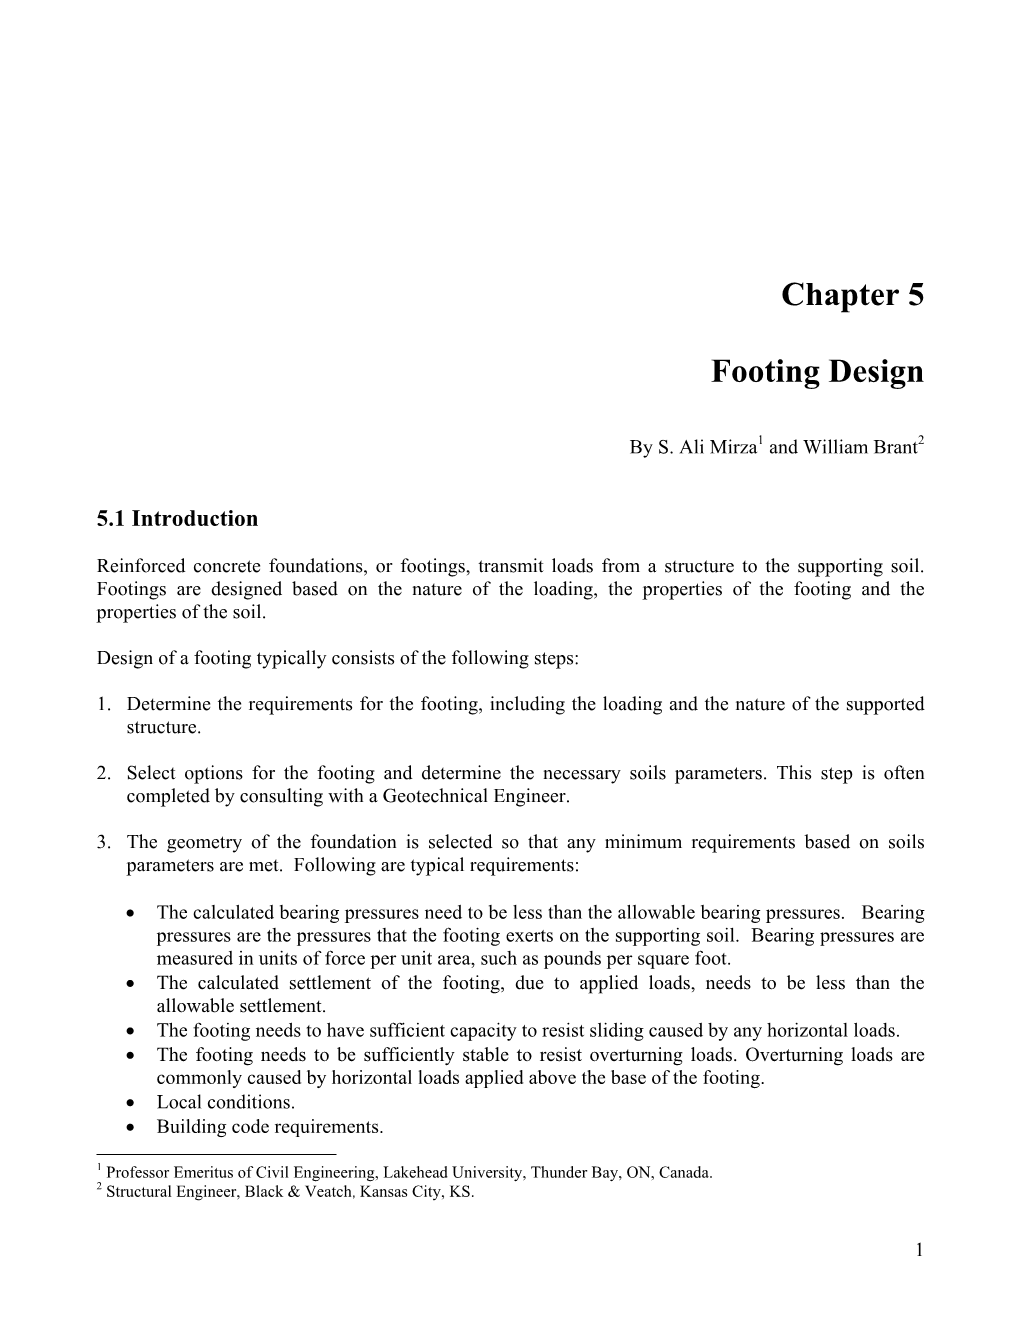 Chapter 5 Footing Design